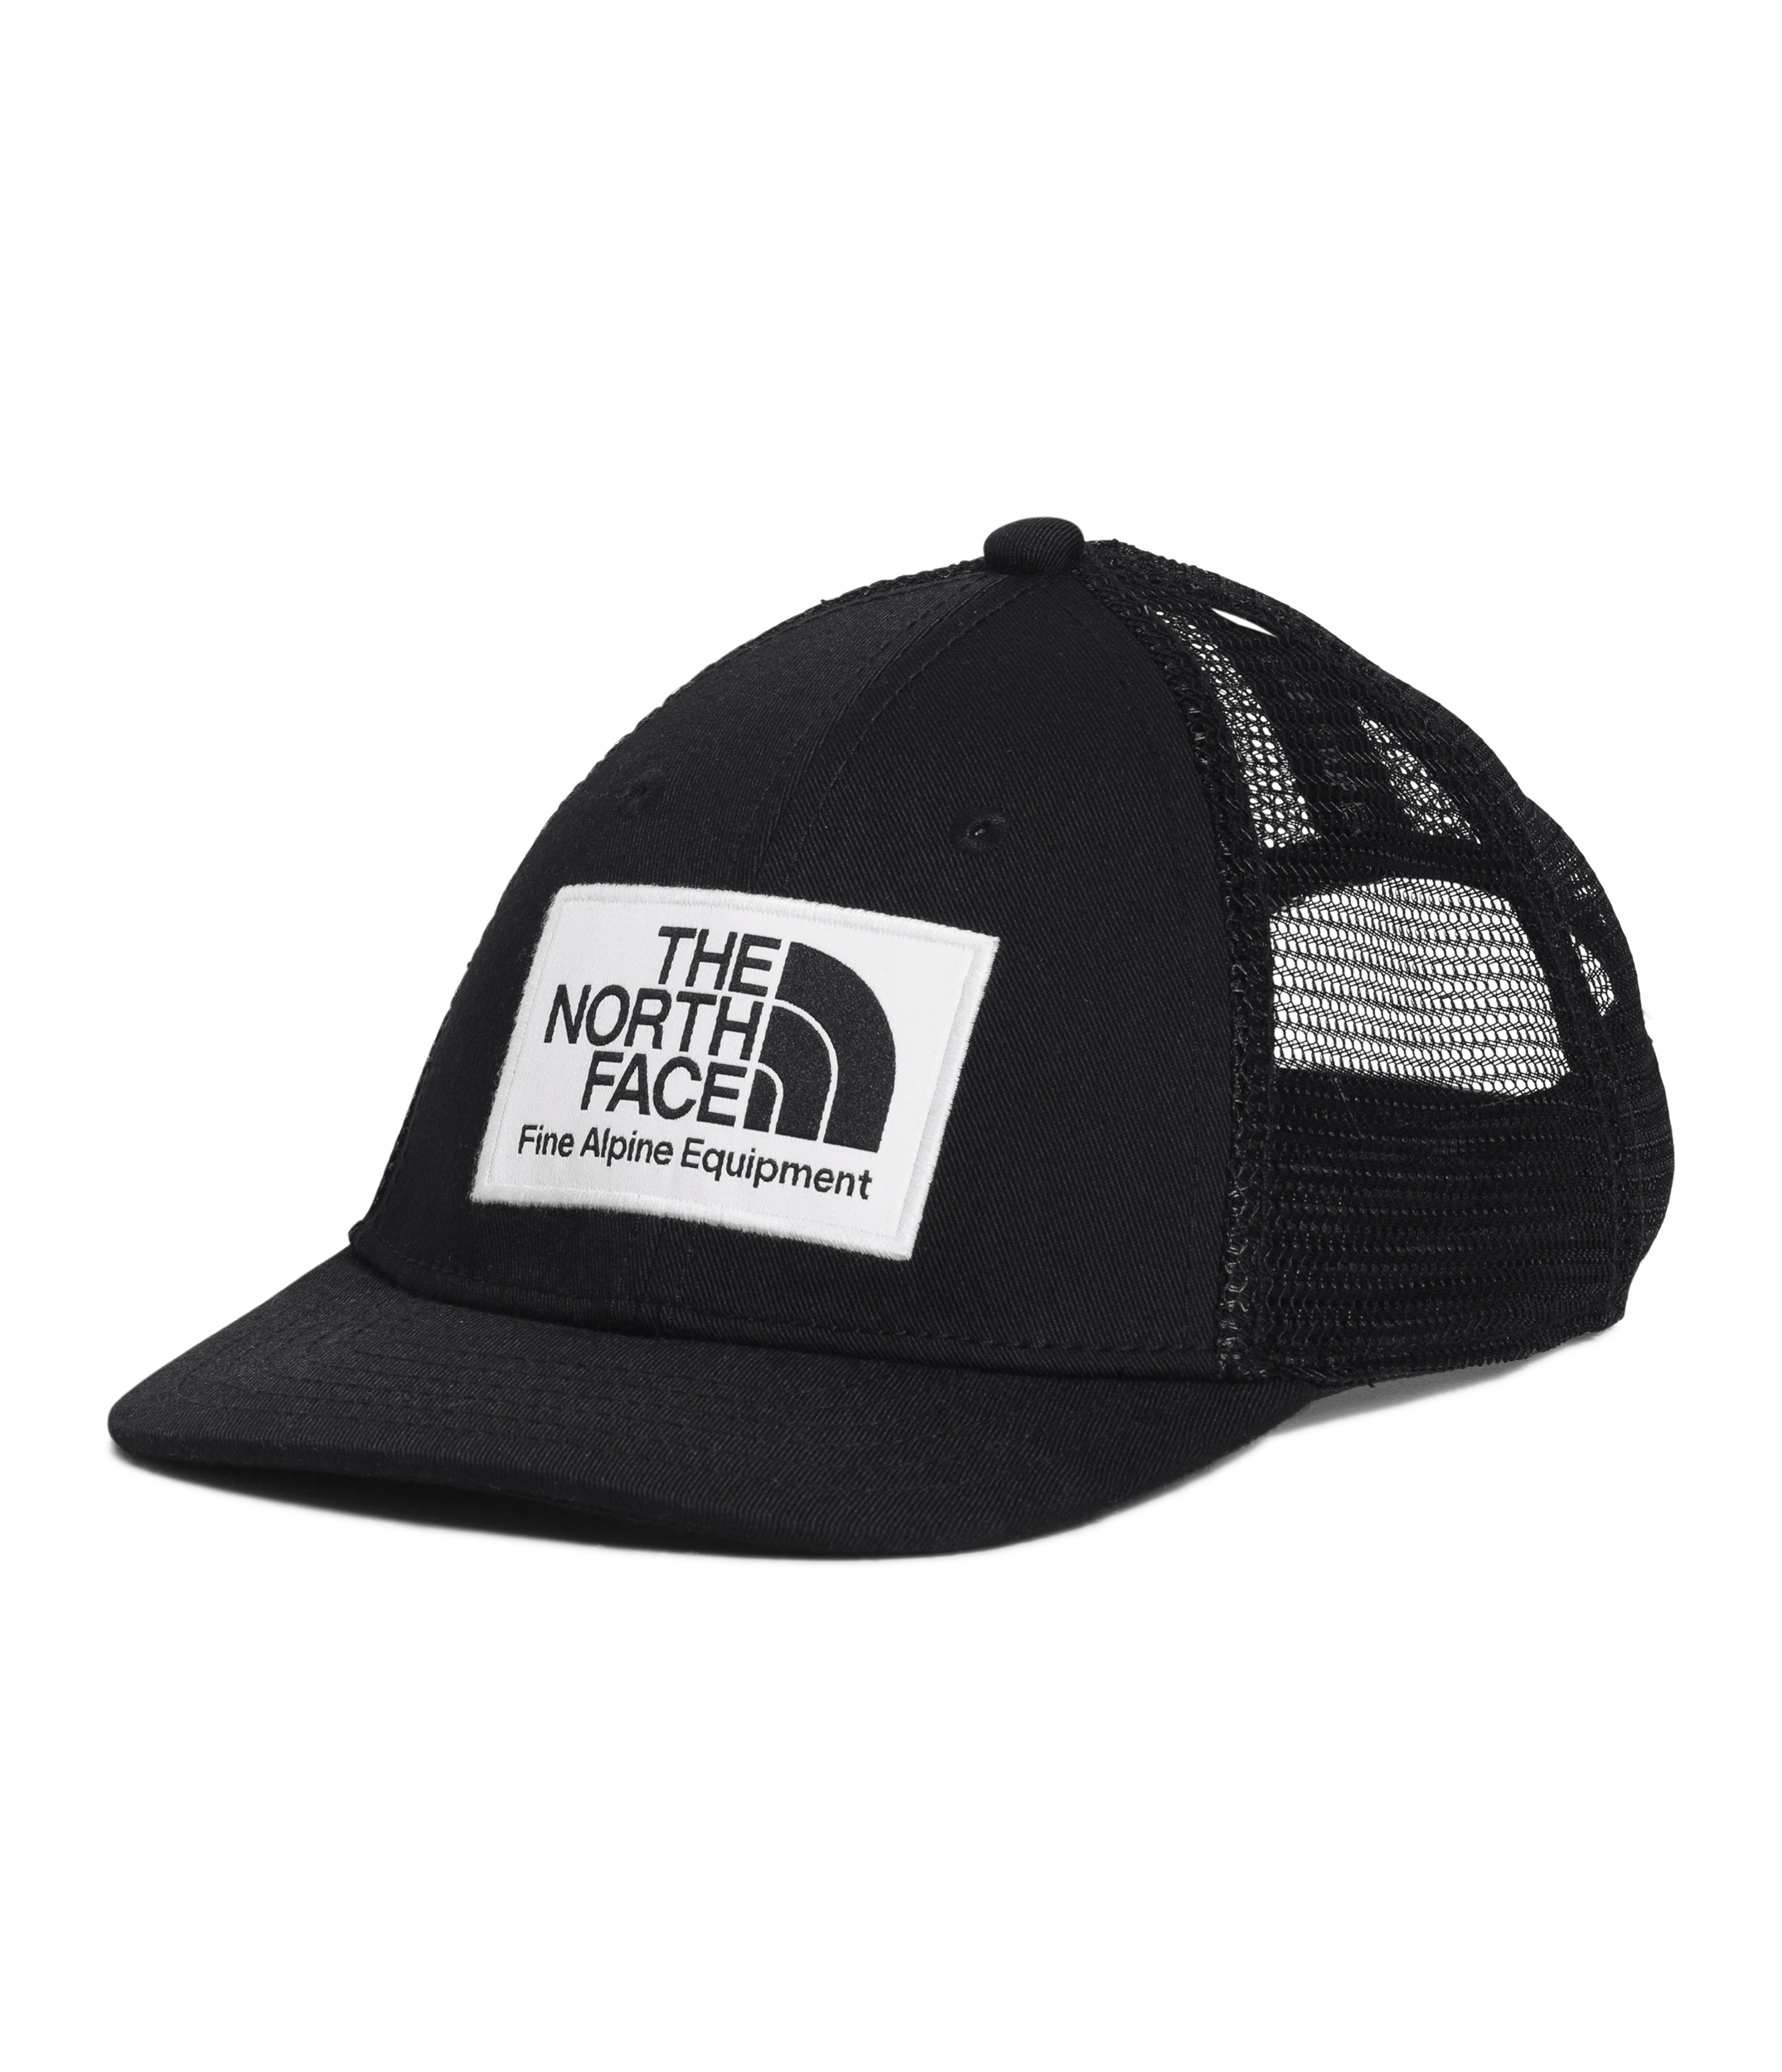 The North Face Kids' Mudder Trucker - Mountain Kids Outfitters: TNF Black Color - White Background front view